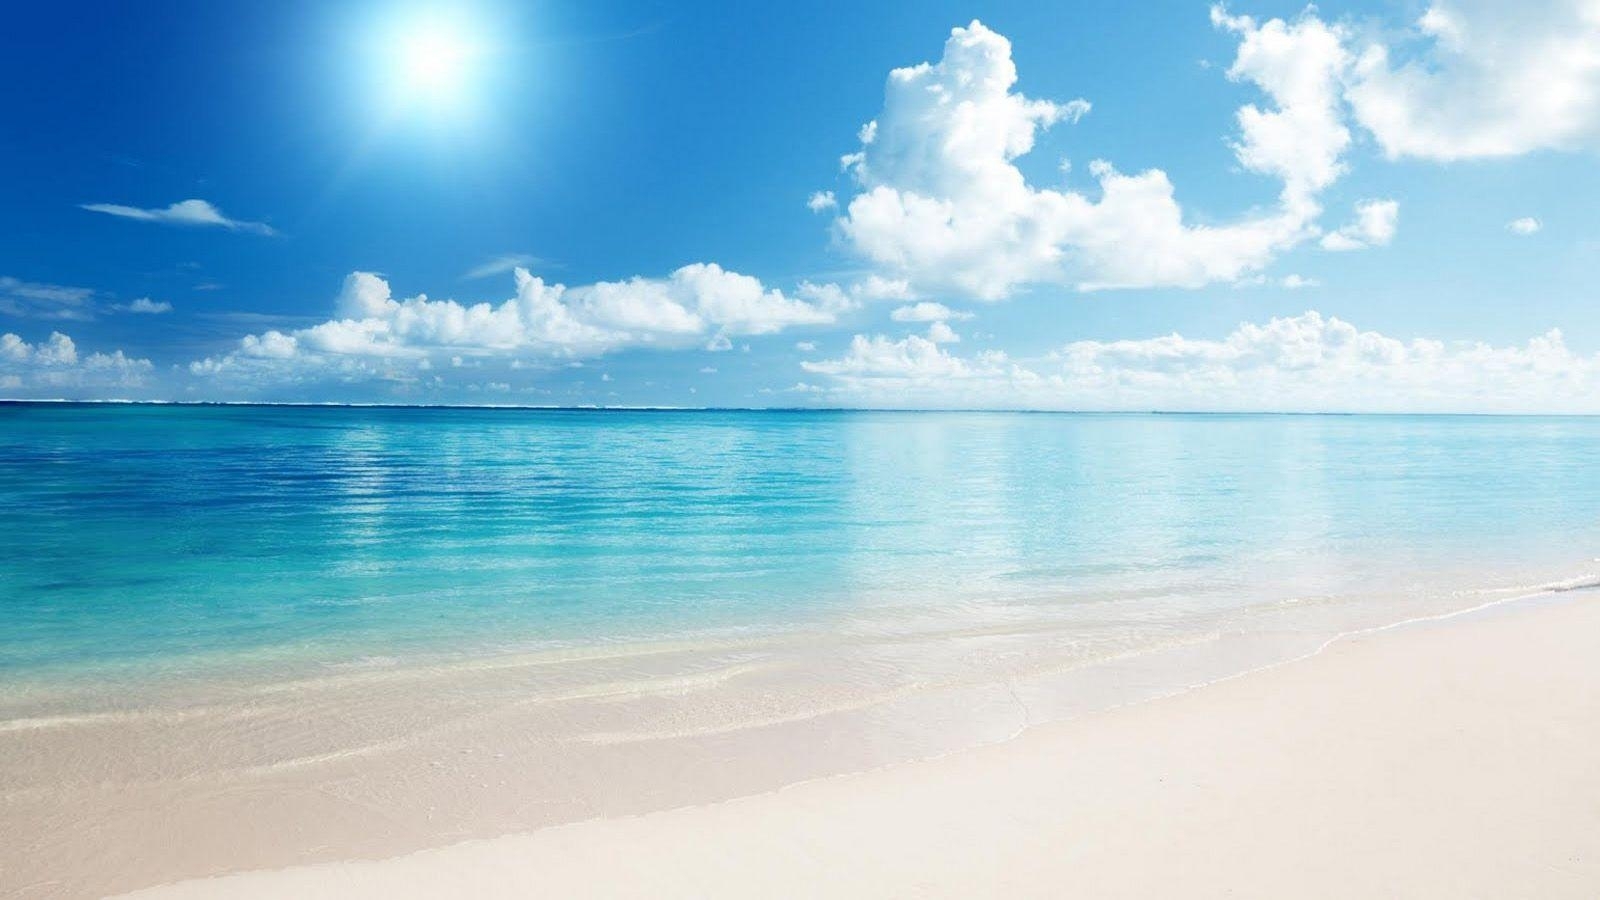 10 New Beach Backgrounds For Pictures FULL HD 1920×1080 For PC Background